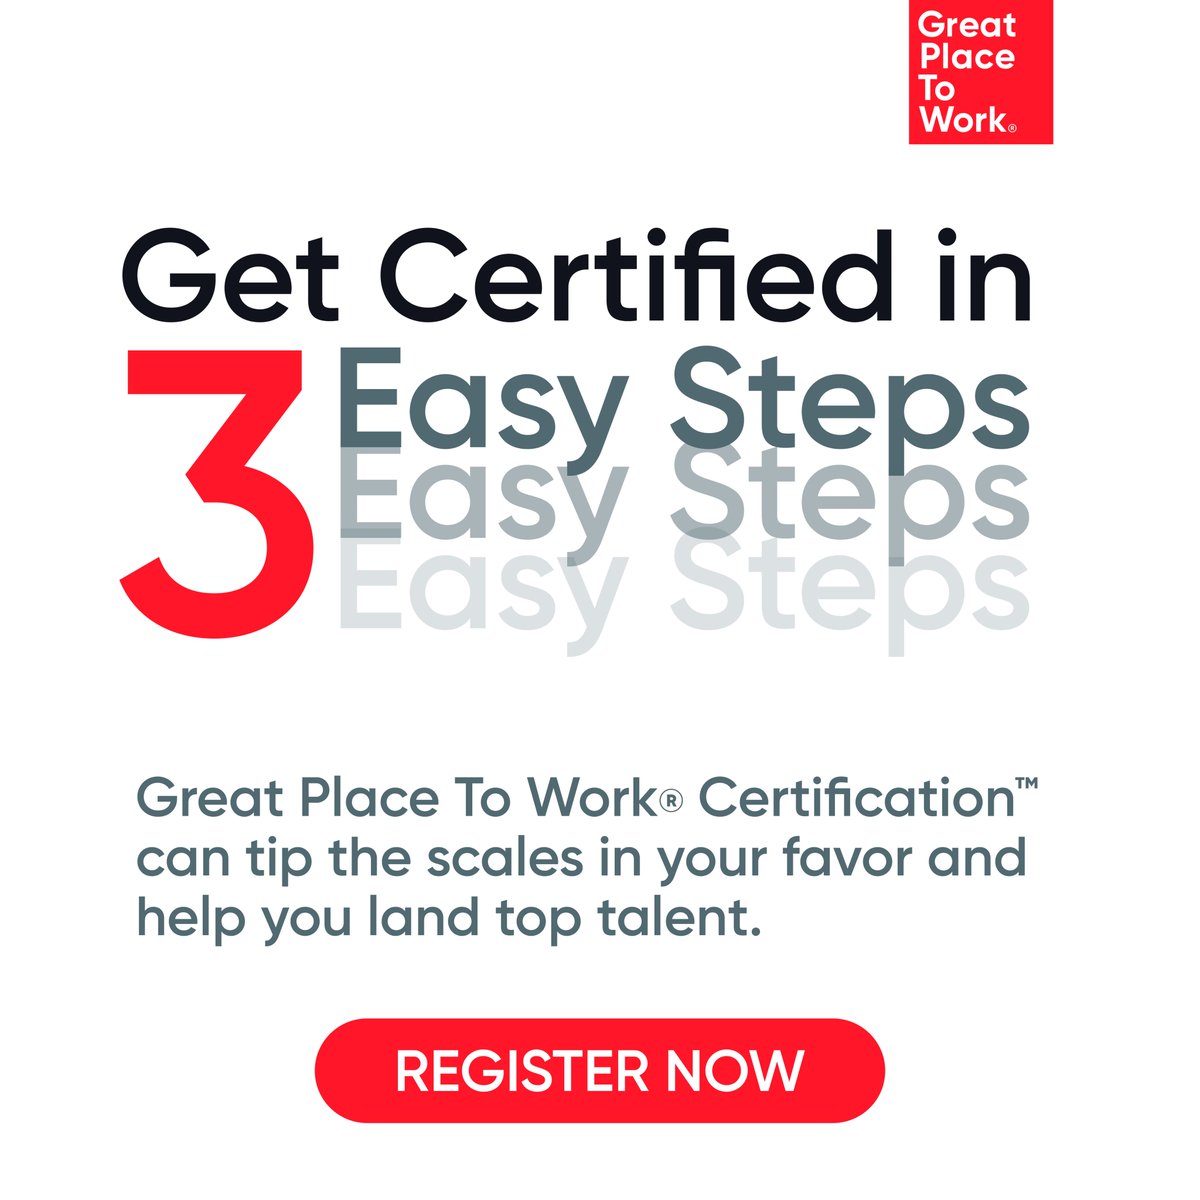 Get a recruiting edge with Great Place To Work® Certification™. Three steps: survey, brief, and celebrate. Boost talent attraction and retention.

Learn more: bit.ly/3vloDiS

#MakingIndiaAGreatPlaceToWorkForAll #BestWorkplaces #GPTW4ALL #GetCertified